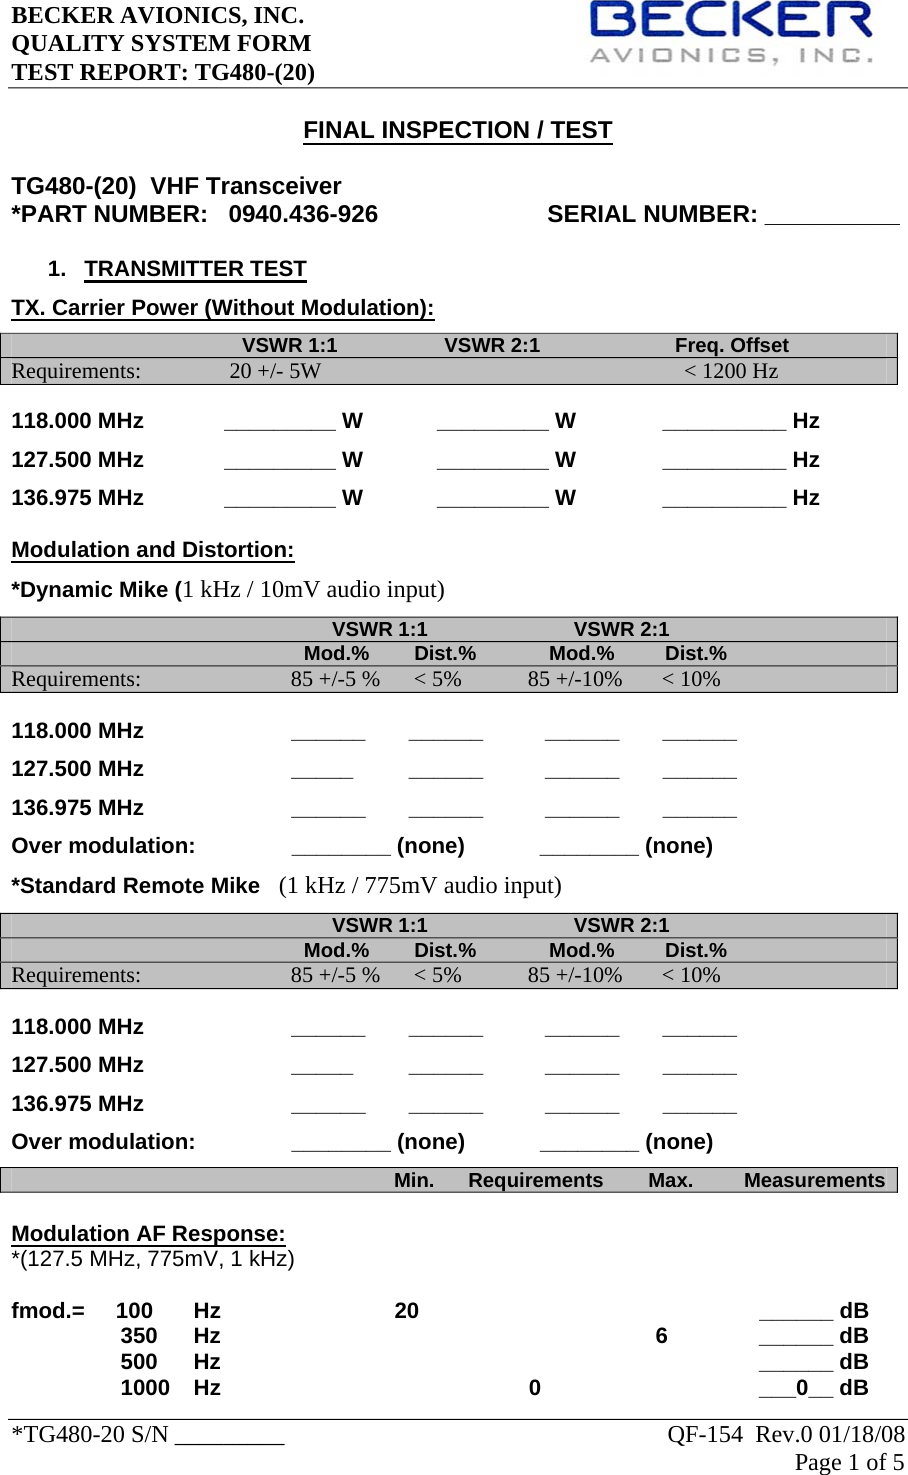 BECKER AVIONICS, INC.     QUALITY SYSTEM FORM TEST REPORT: TG480-(20)   *TG480-20 S/N _________                                                               QF-154  Rev.0 01/18/08 Page 1 of 5    FINAL INSPECTION / TEST  TG480-(20)  VHF Transceiver *PART NUMBER:   0940.436-926                         SERIAL NUMBER: __________                            1.  TRANSMITTER TEST TX. Carrier Power (Without Modulation):                                          VSWR 1:1                   VSWR 2:1                        Freq. Offset       Requirements:               20 +/- 5W                                             &lt; 1200 Hz  118.000 MHz             _________ W            _________ W              __________ Hz   127.500 MHz             _________ W            _________ W              __________ Hz   136.975 MHz             _________ W            _________ W              __________ Hz  Modulation and Distortion:   *Dynamic Mike (1 kHz / 10mV audio input)                                                          VSWR 1:1                          VSWR 2:1                                                                                         Mod.%        Dist.%             Mod.%         Dist.%             Requirements:                          85 +/-5 %      &lt; 5%     85 +/-10%       &lt; 10% 118.000 MHz                ______       ______          ______       ______  127.500 MHz        _____         ______          ______       ______  136.975 MHz        ______       ______          ______       ______  Over modulation:            ________ (none)     ________ (none)             *Standard Remote Mike   (1 kHz / 775mV audio input)                                                          VSWR 1:1                          VSWR 2:1                                                                                         Mod.%        Dist.%             Mod.%         Dist.%             Requirements:                          85 +/-5 %      &lt; 5%     85 +/-10%       &lt; 10% 118.000 MHz                ______       ______          ______       ______  127.500 MHz        _____         ______          ______       ______  136.975 MHz        ______       ______          ______       ______  Over modulation:            ________ (none)     ________ (none)                                                                         Min.      Requirements        Max.         Measurements Modulation AF Response: *(127.5 MHz, 775mV, 1 kHz)  fmod.=     100    Hz     20         ______ dB 350     Hz     6     ______ dB 500    Hz         ______ dB 1000   Hz              0       ___0__ dB 